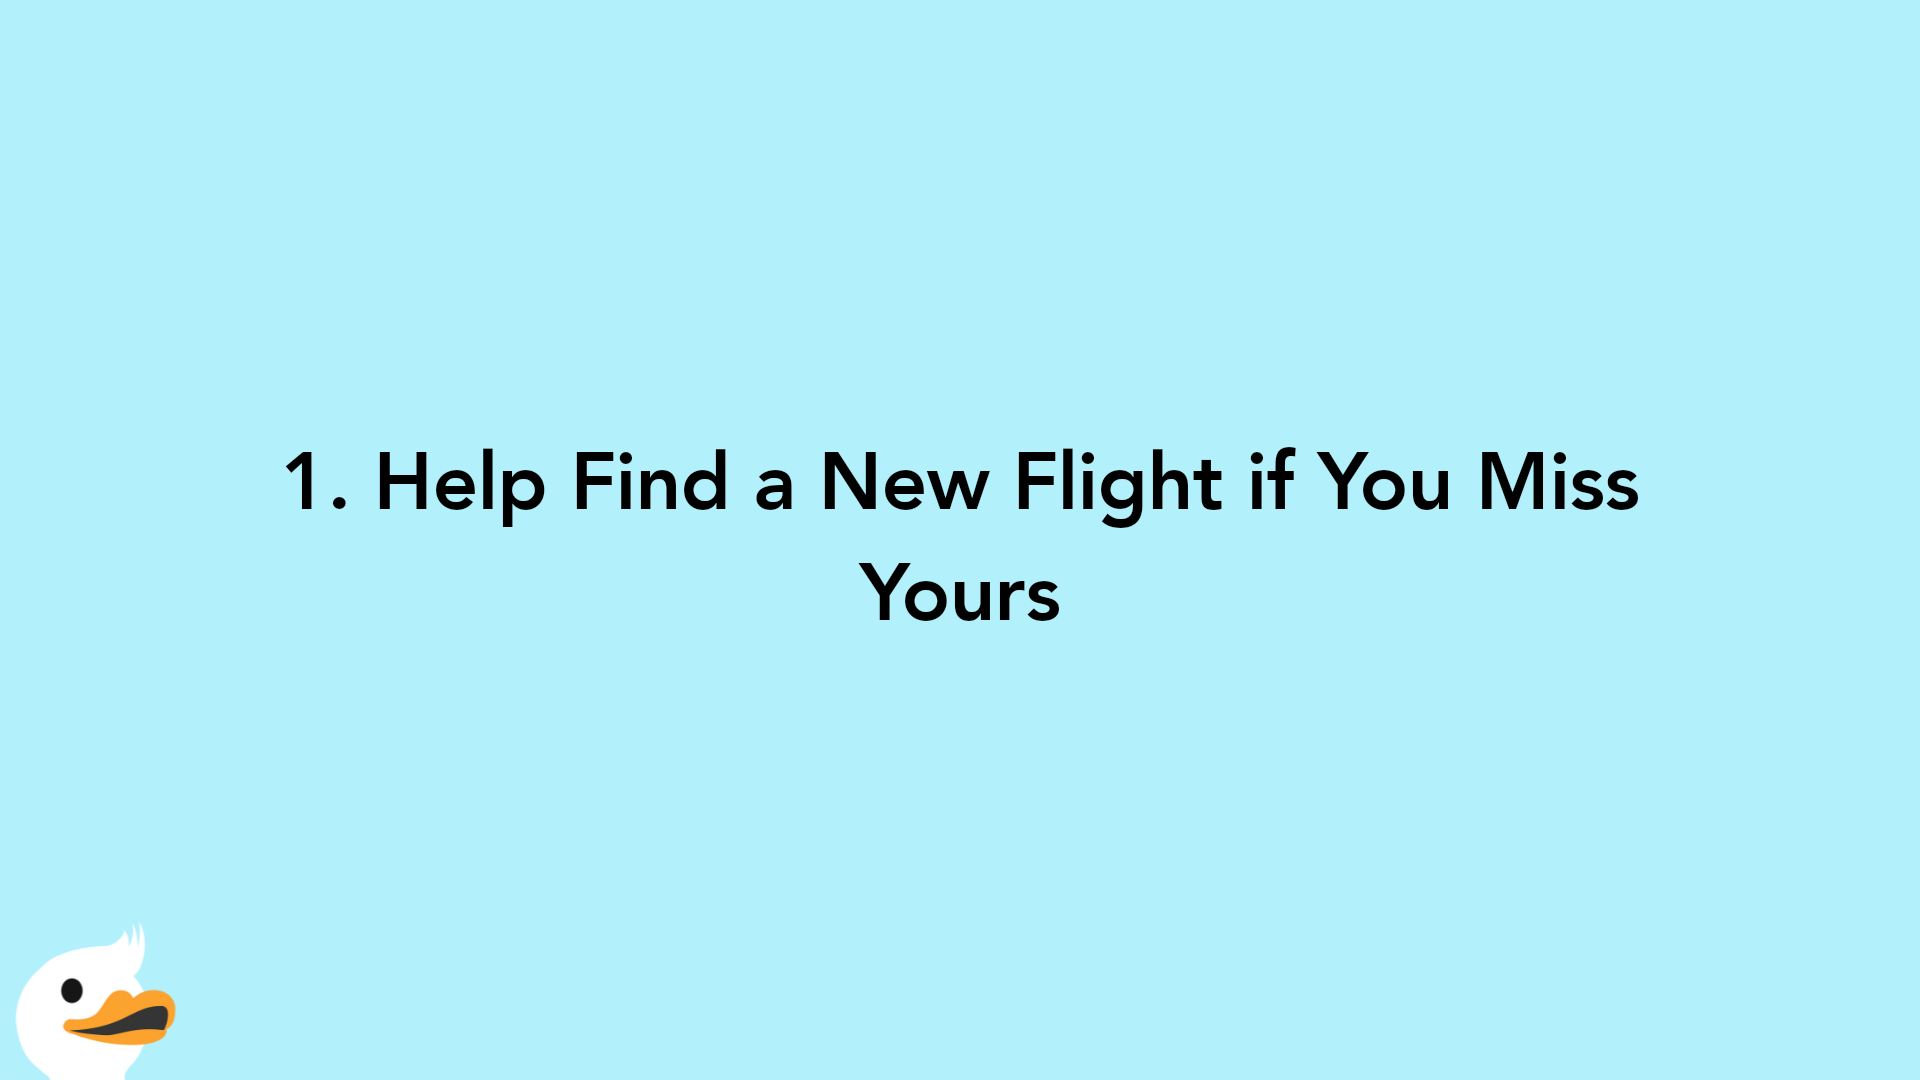 1. Help Find a New Flight if You Miss Yours